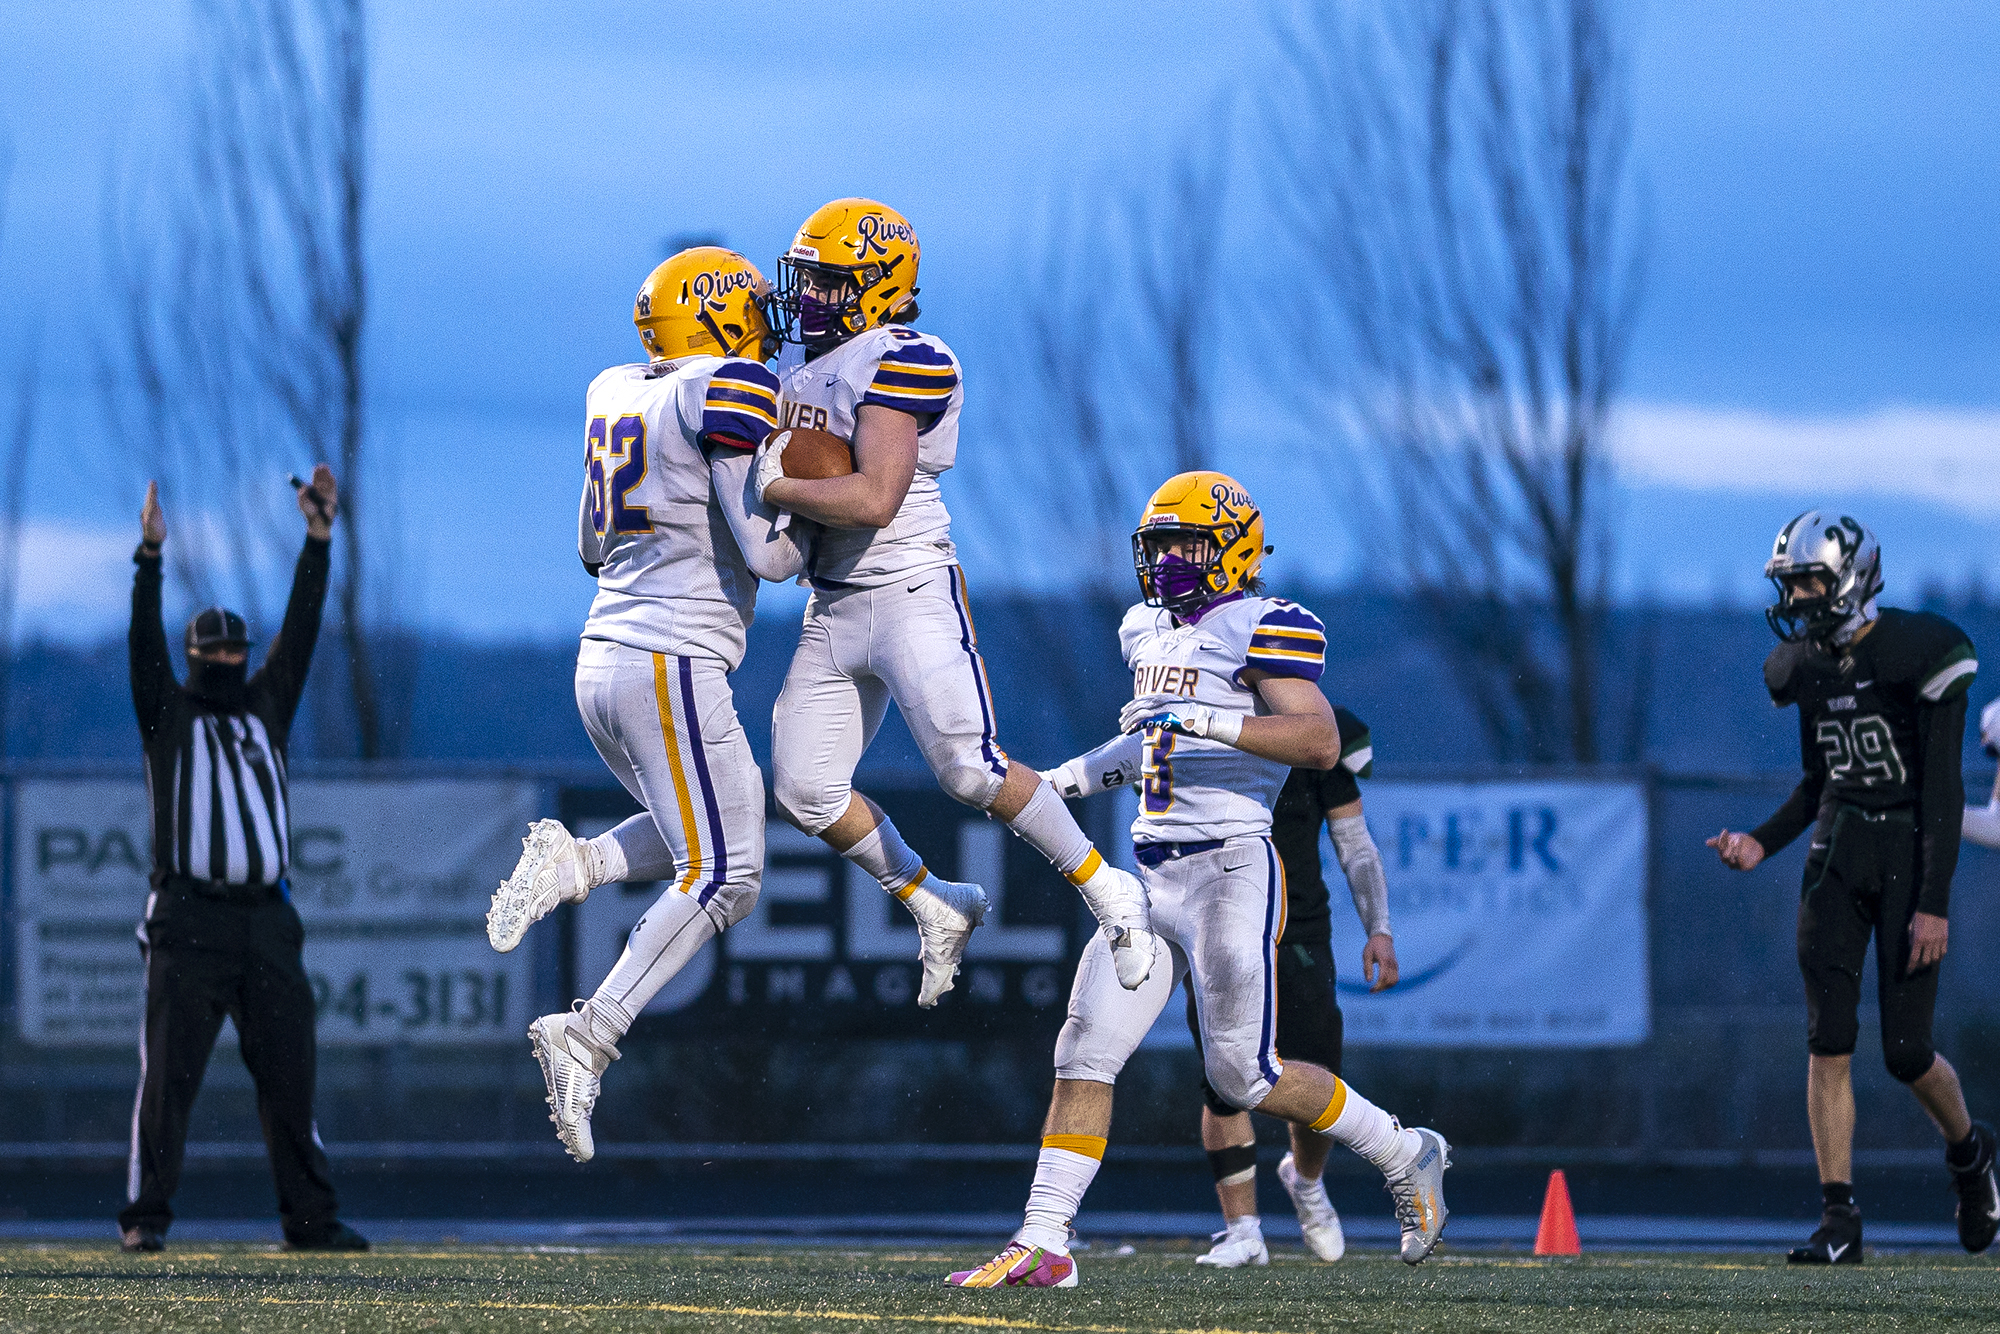 Columbia River celebrates in the end zone before a penalty took back the touchdown during a season opener game at Woodland High School on Saturday night, Feb. 20, 2021.